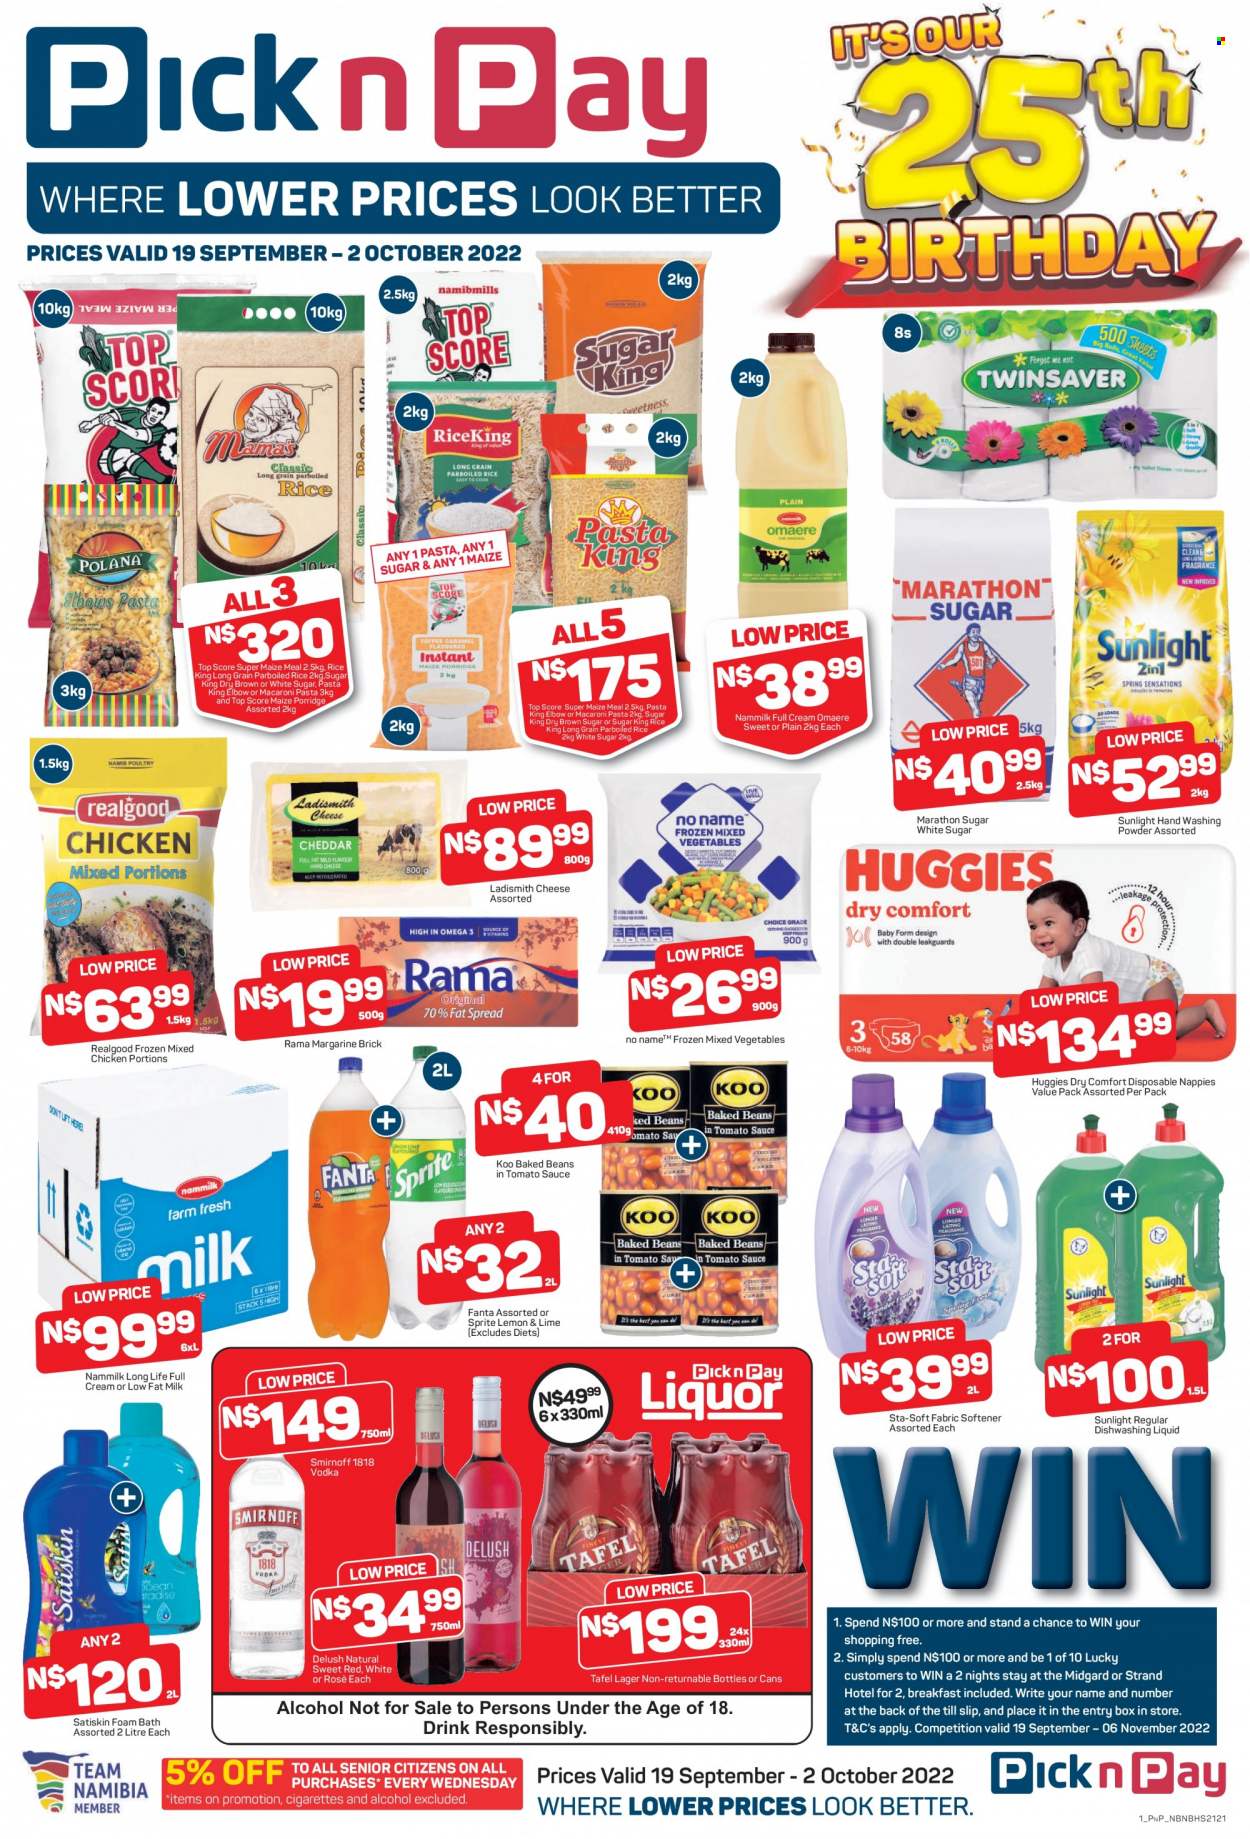 Pick n Pay catalogue  - 19/09/2022 - 02/10/2022 - Sales products - beans, macaroni, pasta, cheese, milk, margarine, Rama, Ladismith, mixed vegetables, cane sugar, maize meal, baked beans, Koo, porridge, rice, parboiled rice, Sprite, Fanta, alcohol, rosé wine, Smirnoff, vodka, beer, Lager, Huggies, nappies, fabric softener, laundry powder, Sunlight, dishwashing liquid, bath foam, Satiskin. Page 1.